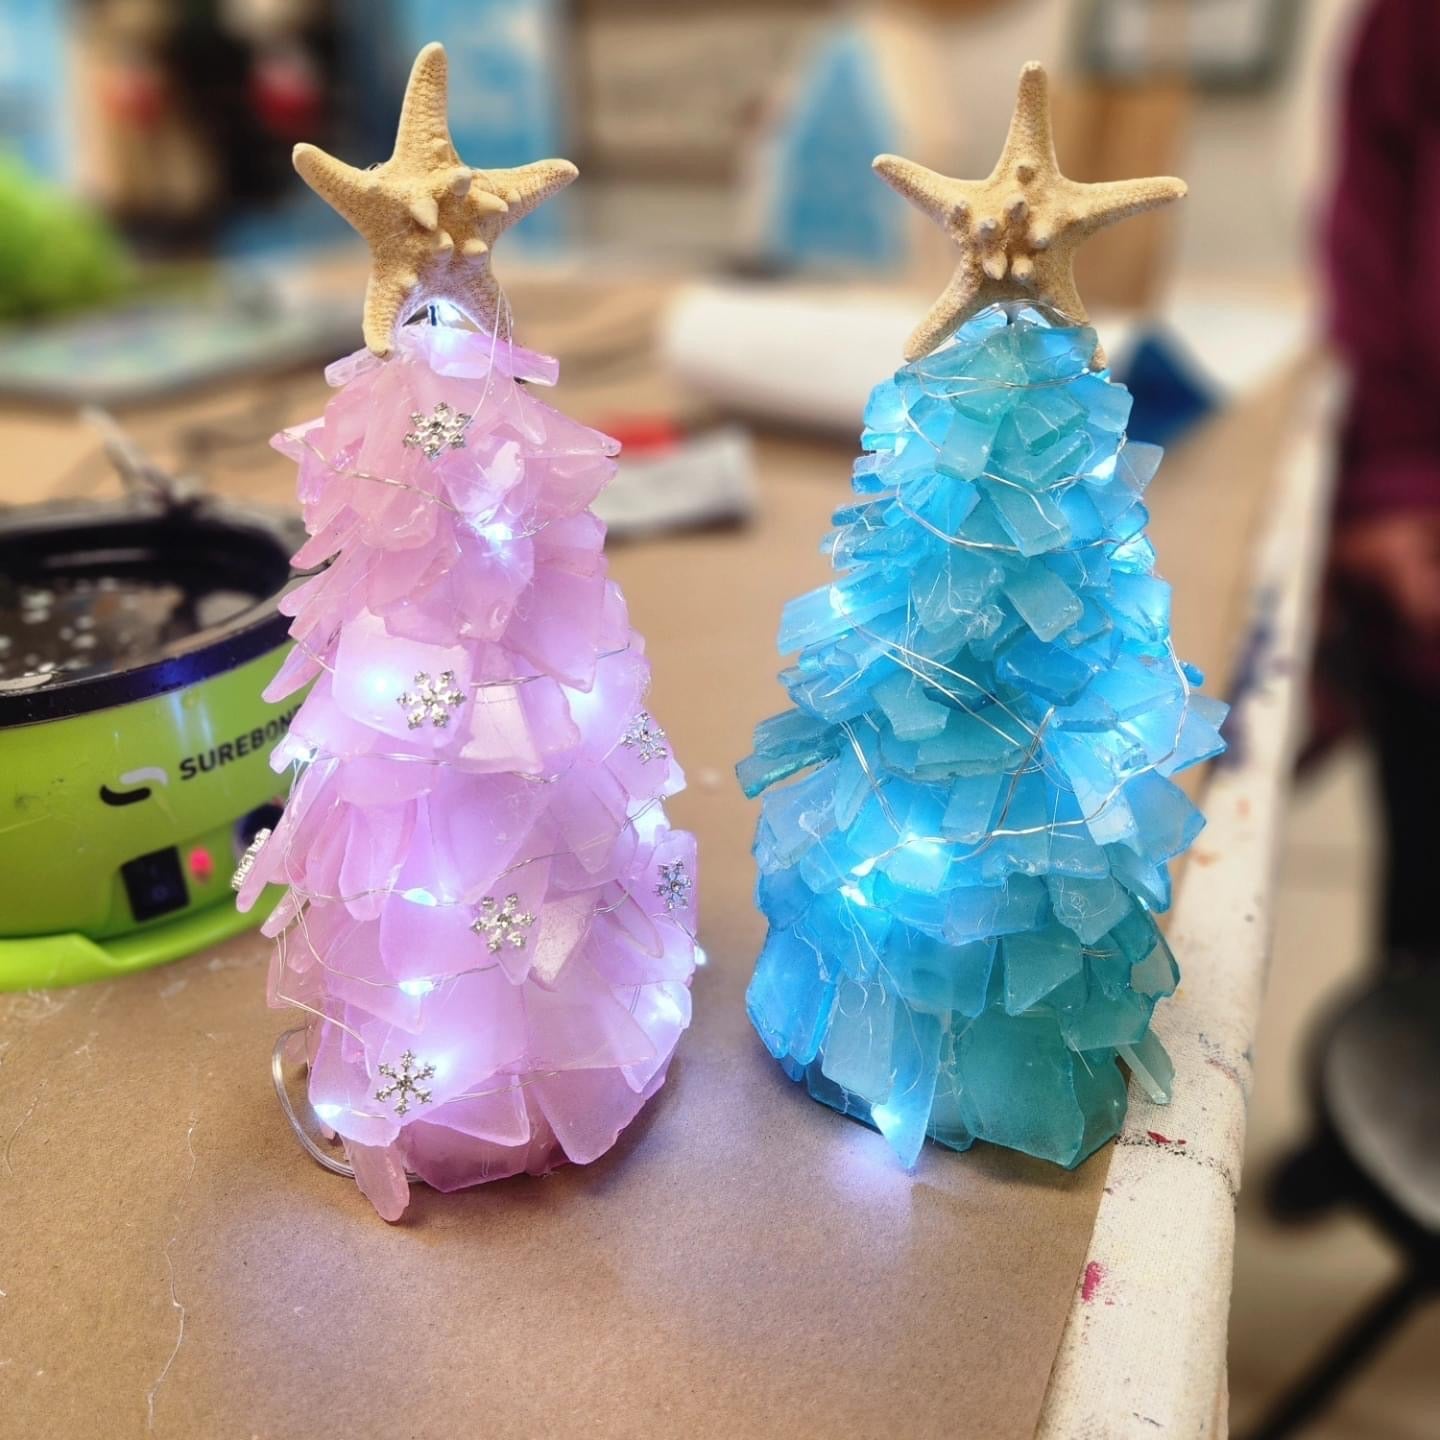 SEA-INSPIRED GLASS TREES & SUCCLENTS MAY 3RD, 11AM